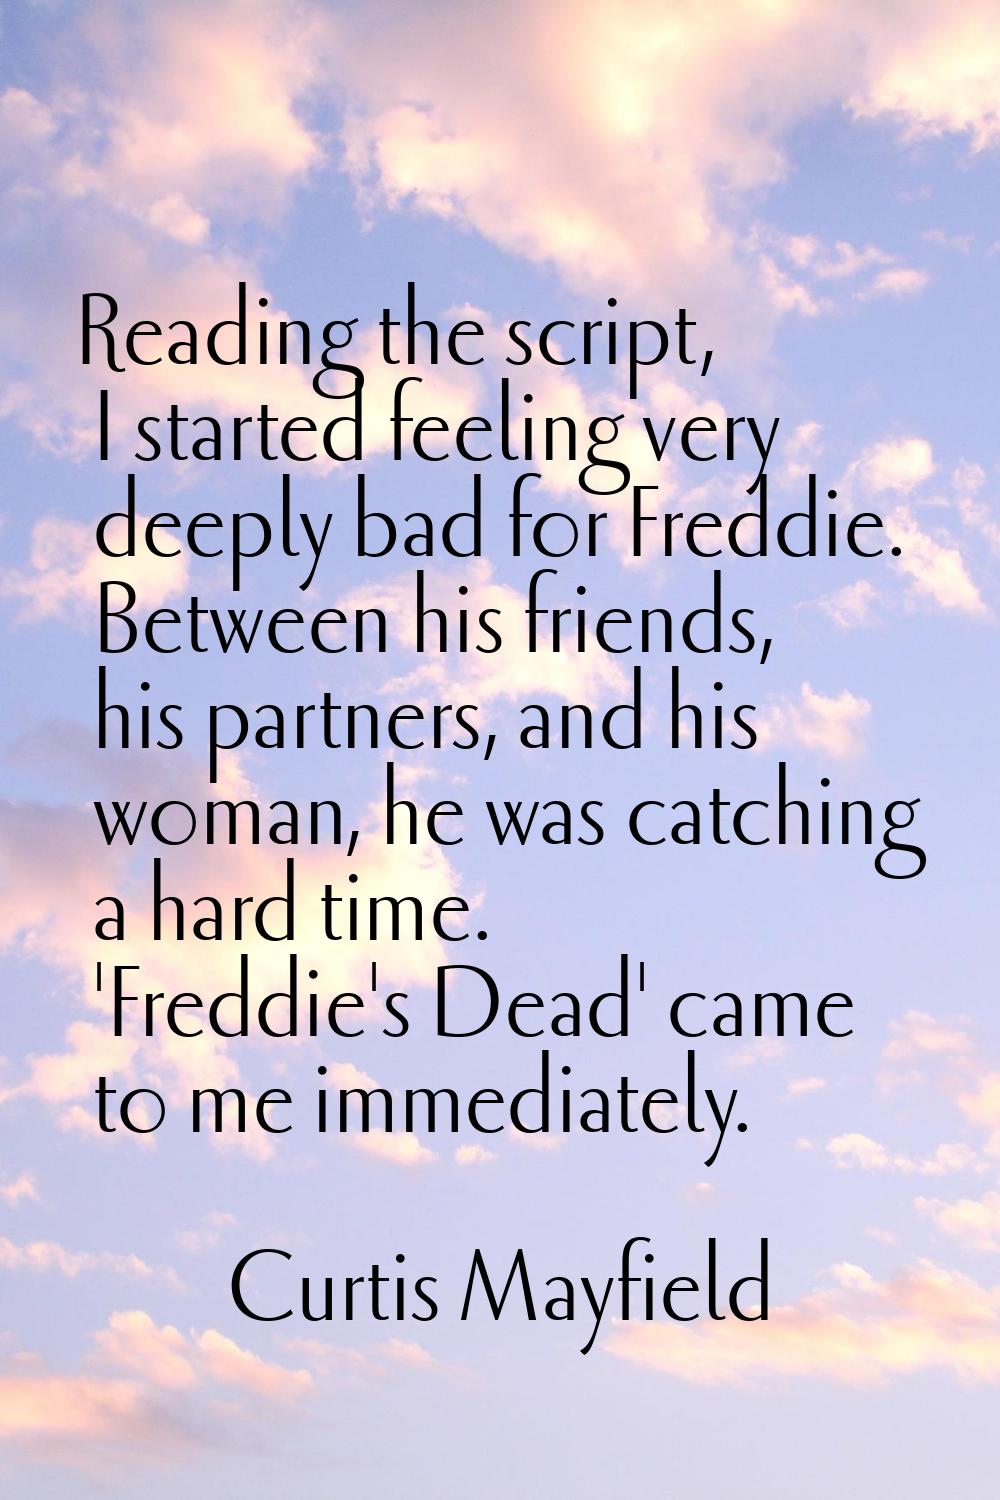 Reading the script, I started feeling very deeply bad for Freddie. Between his friends, his partner